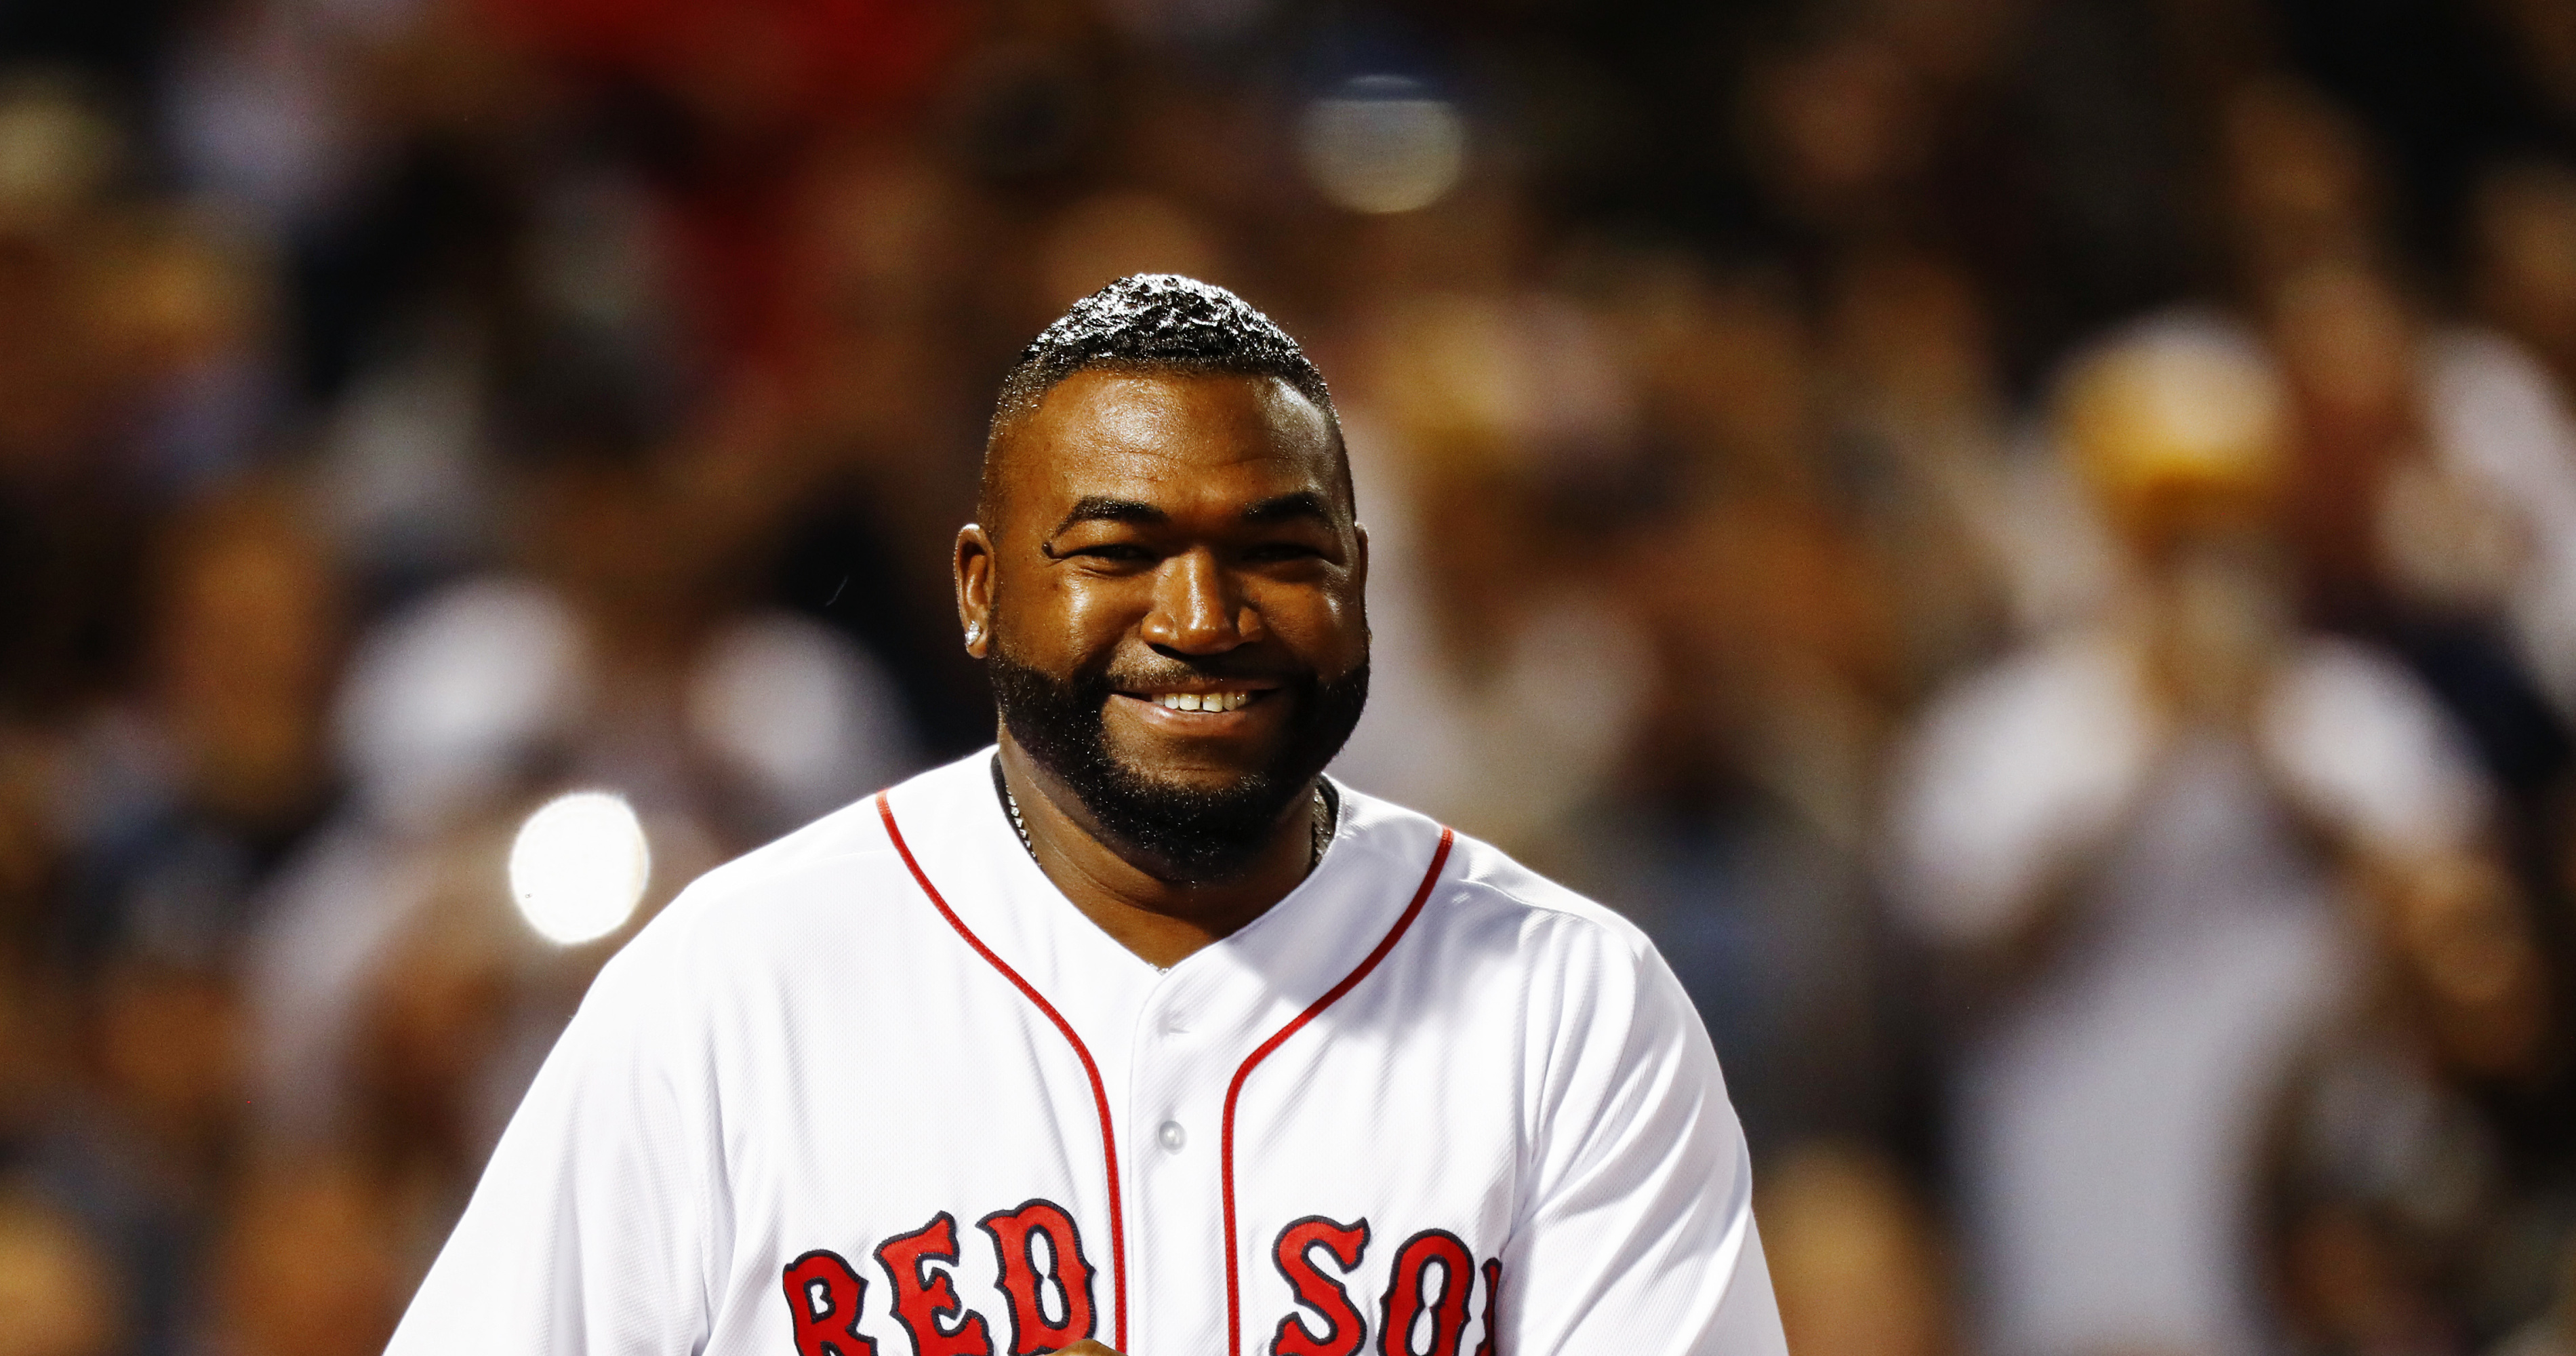 Red Sox slugger David Ortiz elected to Baseball Hall of Fame as Bonds,  Clemens fall short